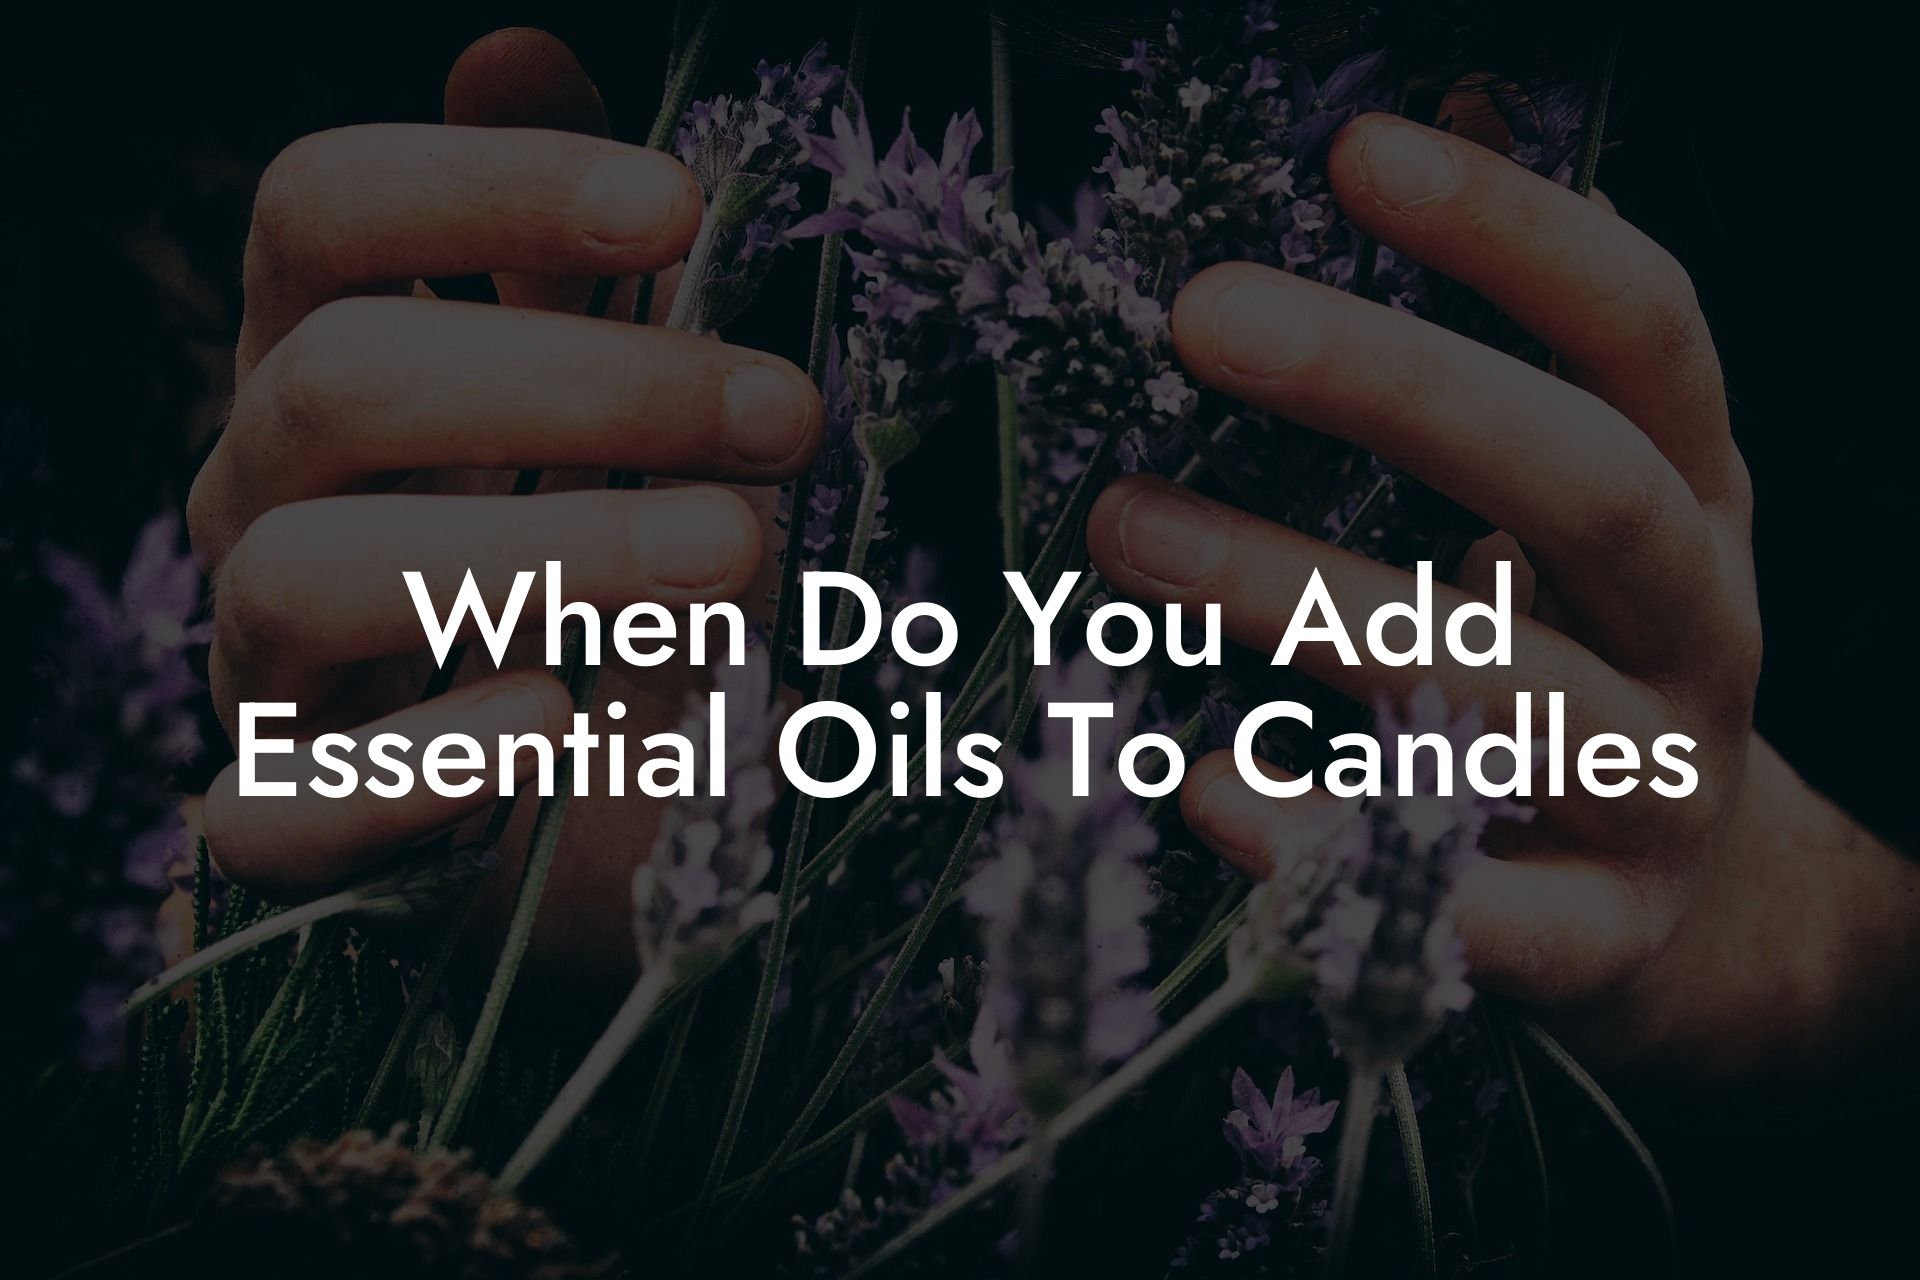 When Do You Add Essential Oils To Candles